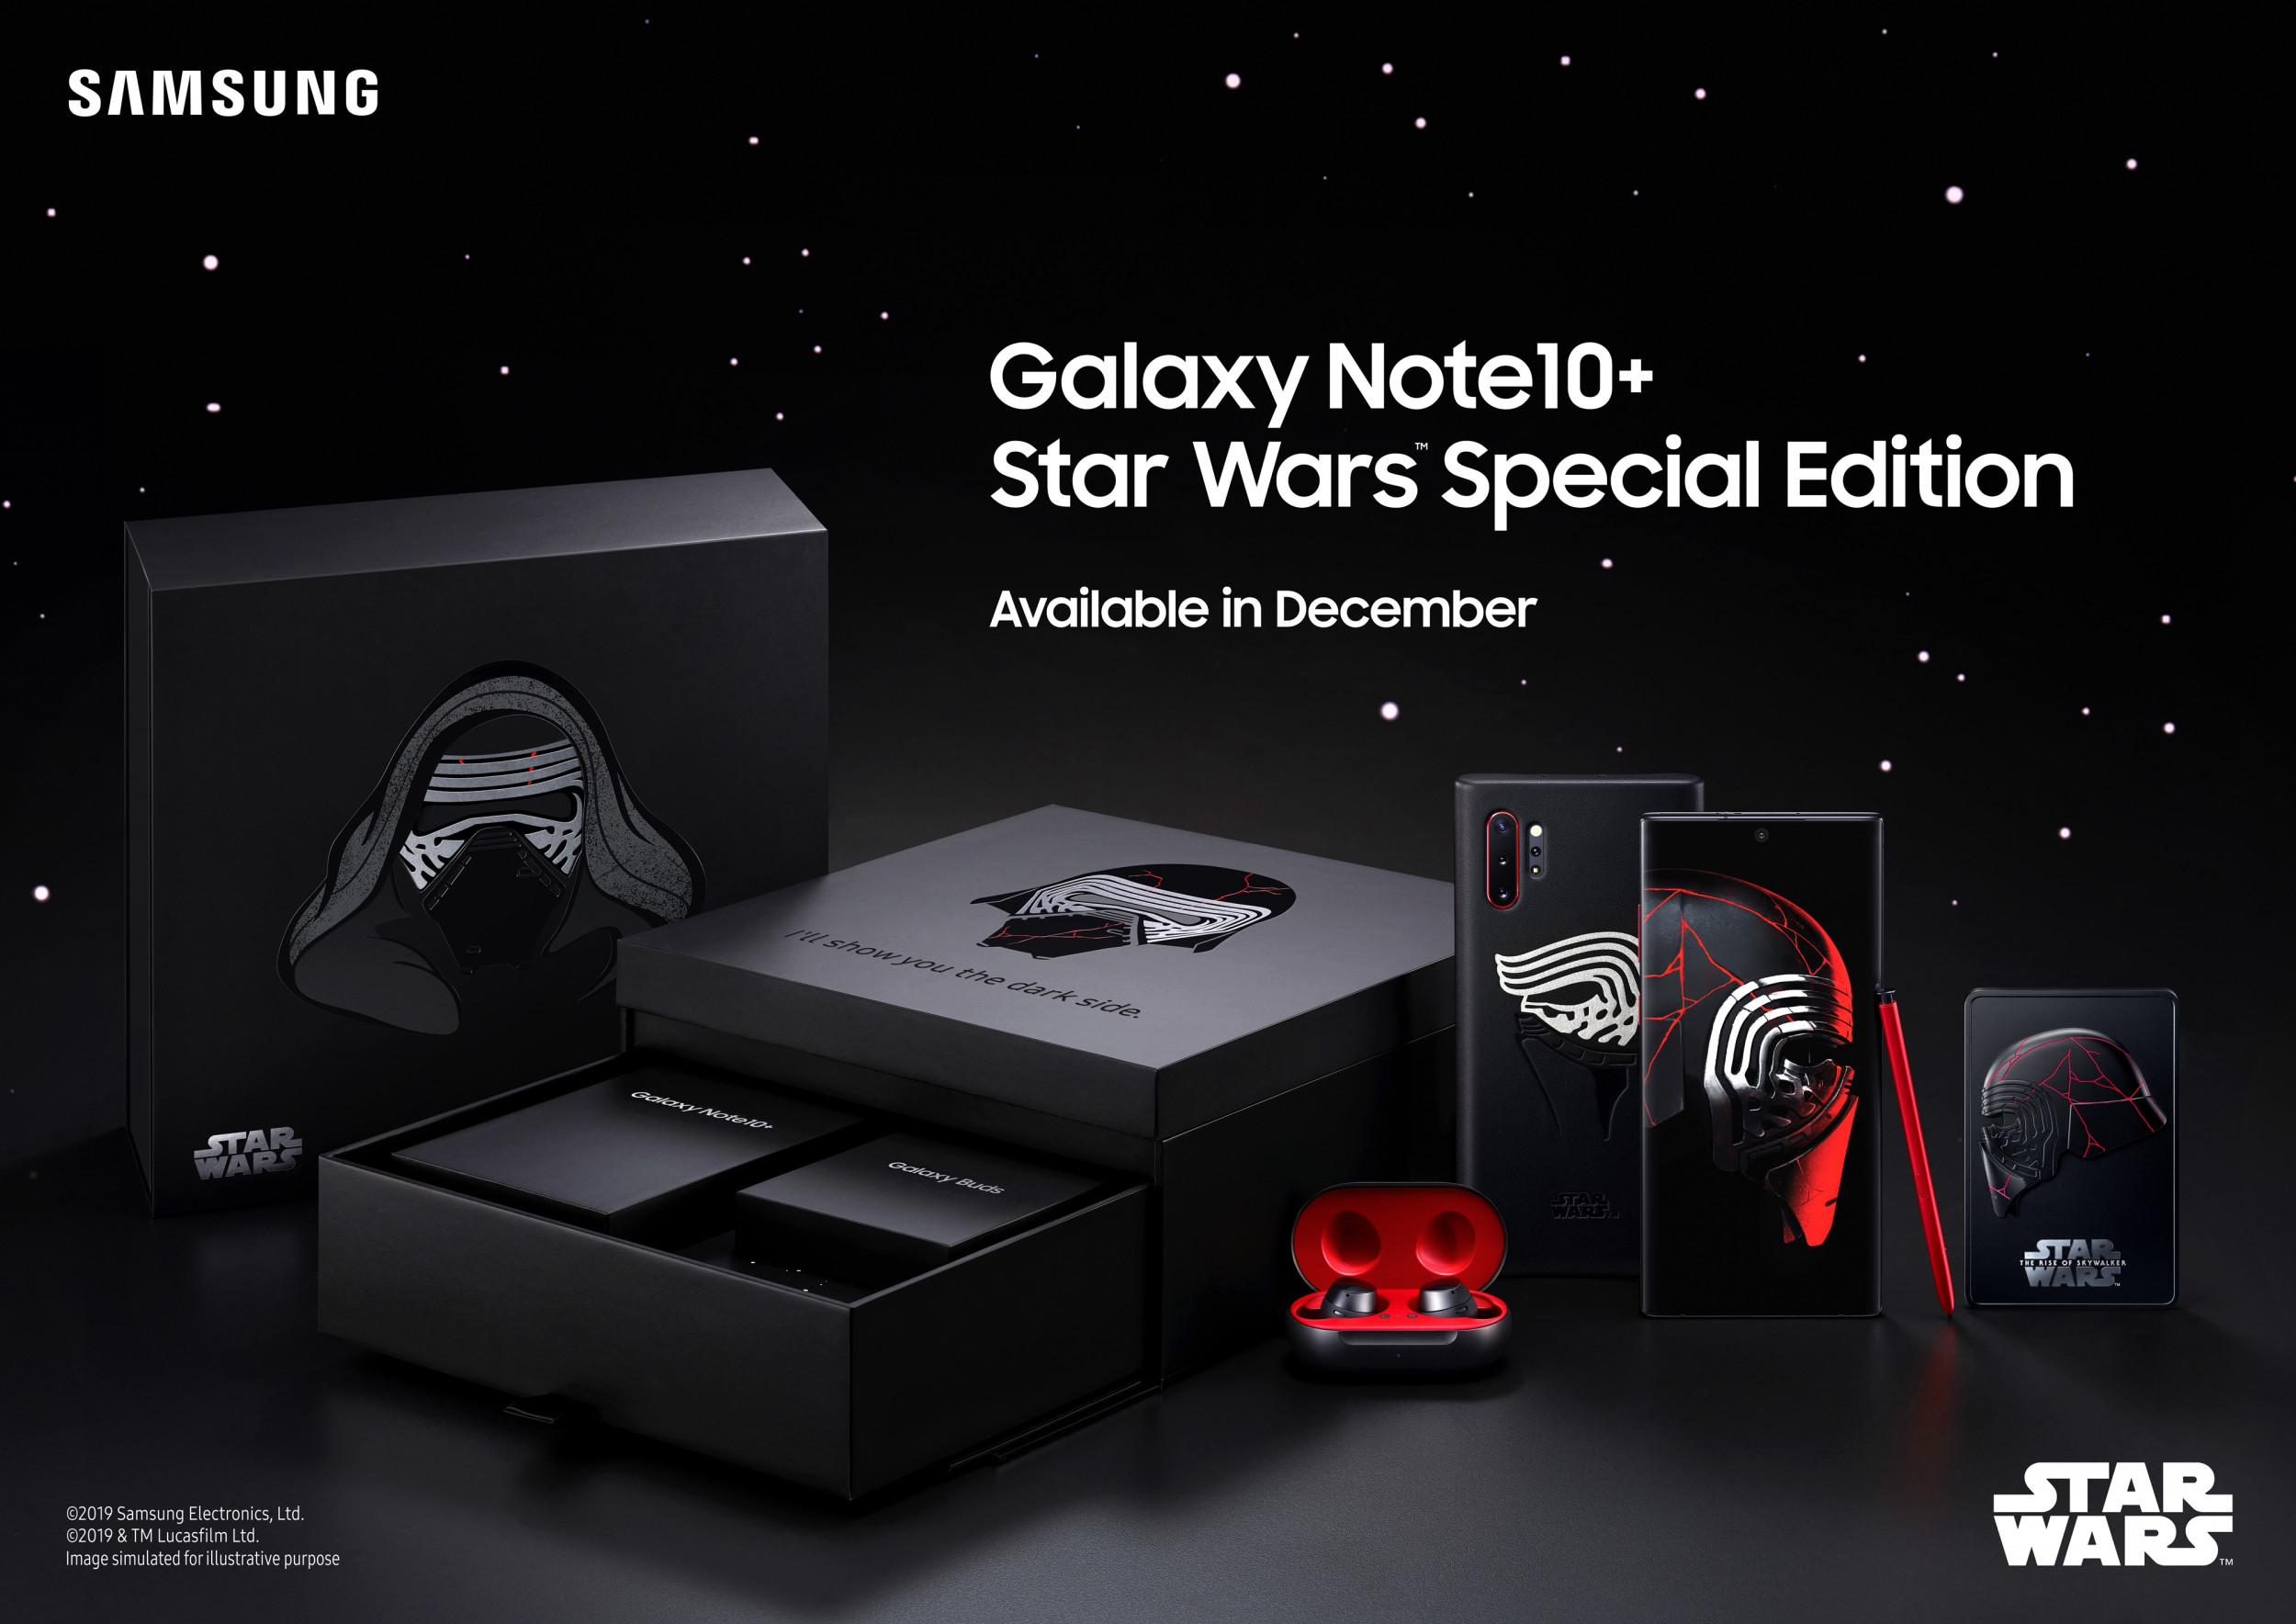 Star Wars Special Edition Samsung Galaxy Note 10+ arrives next month before movie premieres